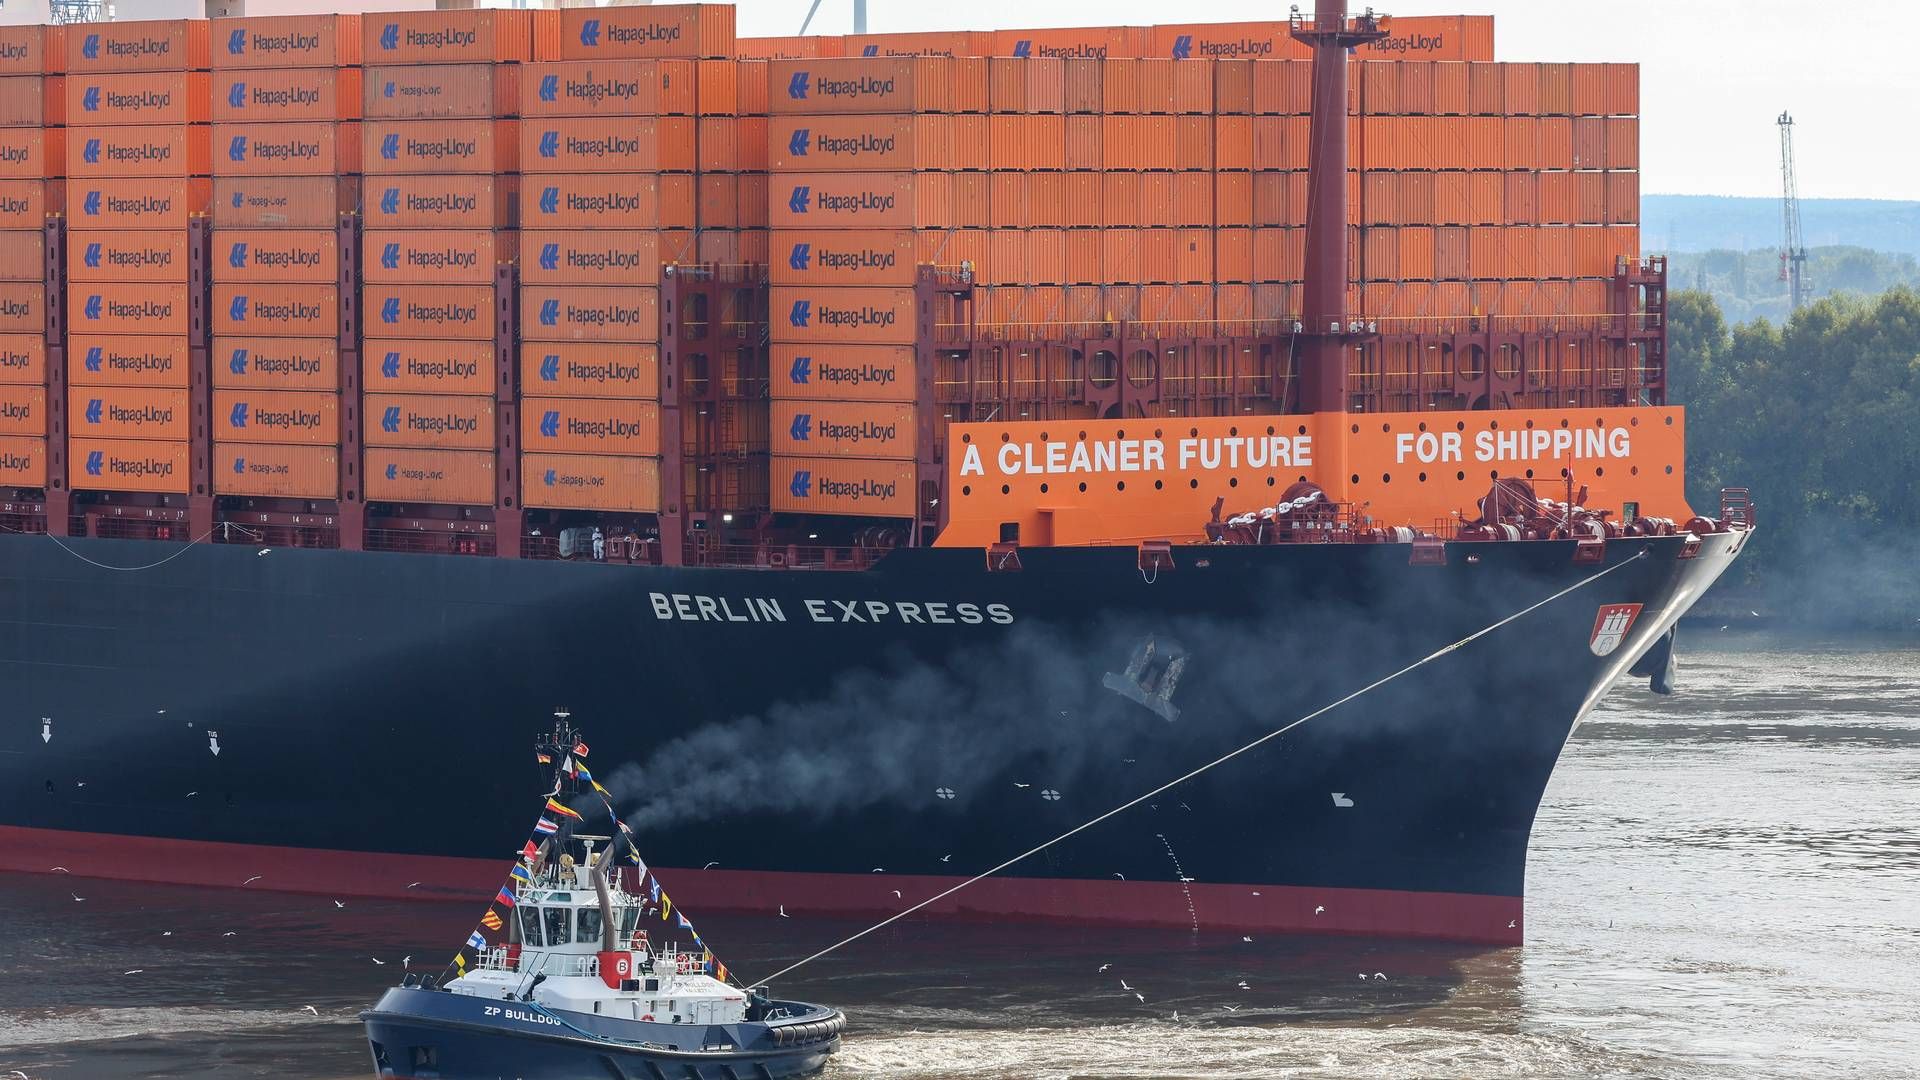 LNG-powered container ship from German carrier Hapag-Lloyd. | Photo: Bodo Marks/AP/Ritzau Scanpix